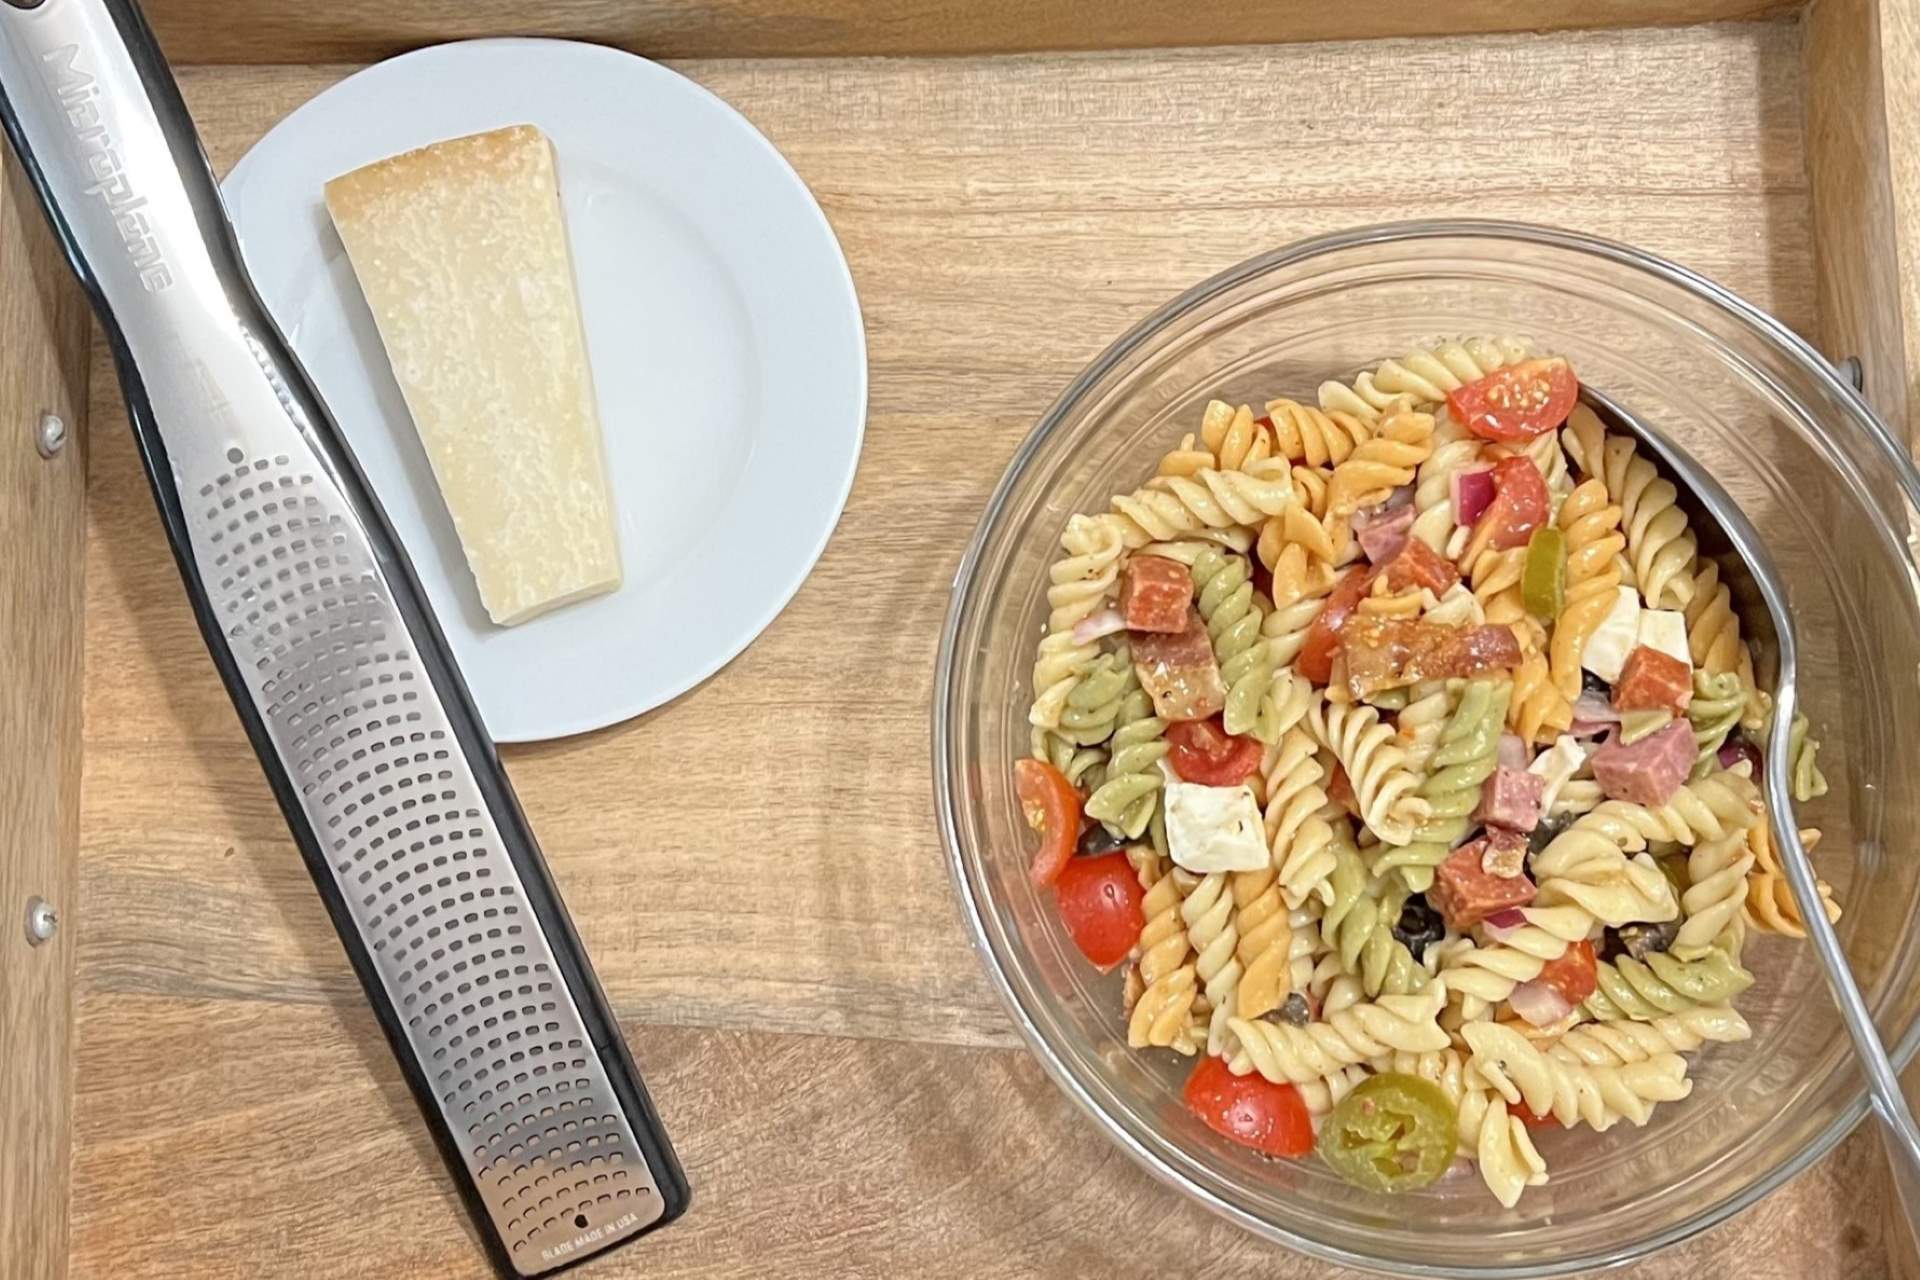 Sunday Suppers: Amanda Moore’s Deli Style Pasta Salad